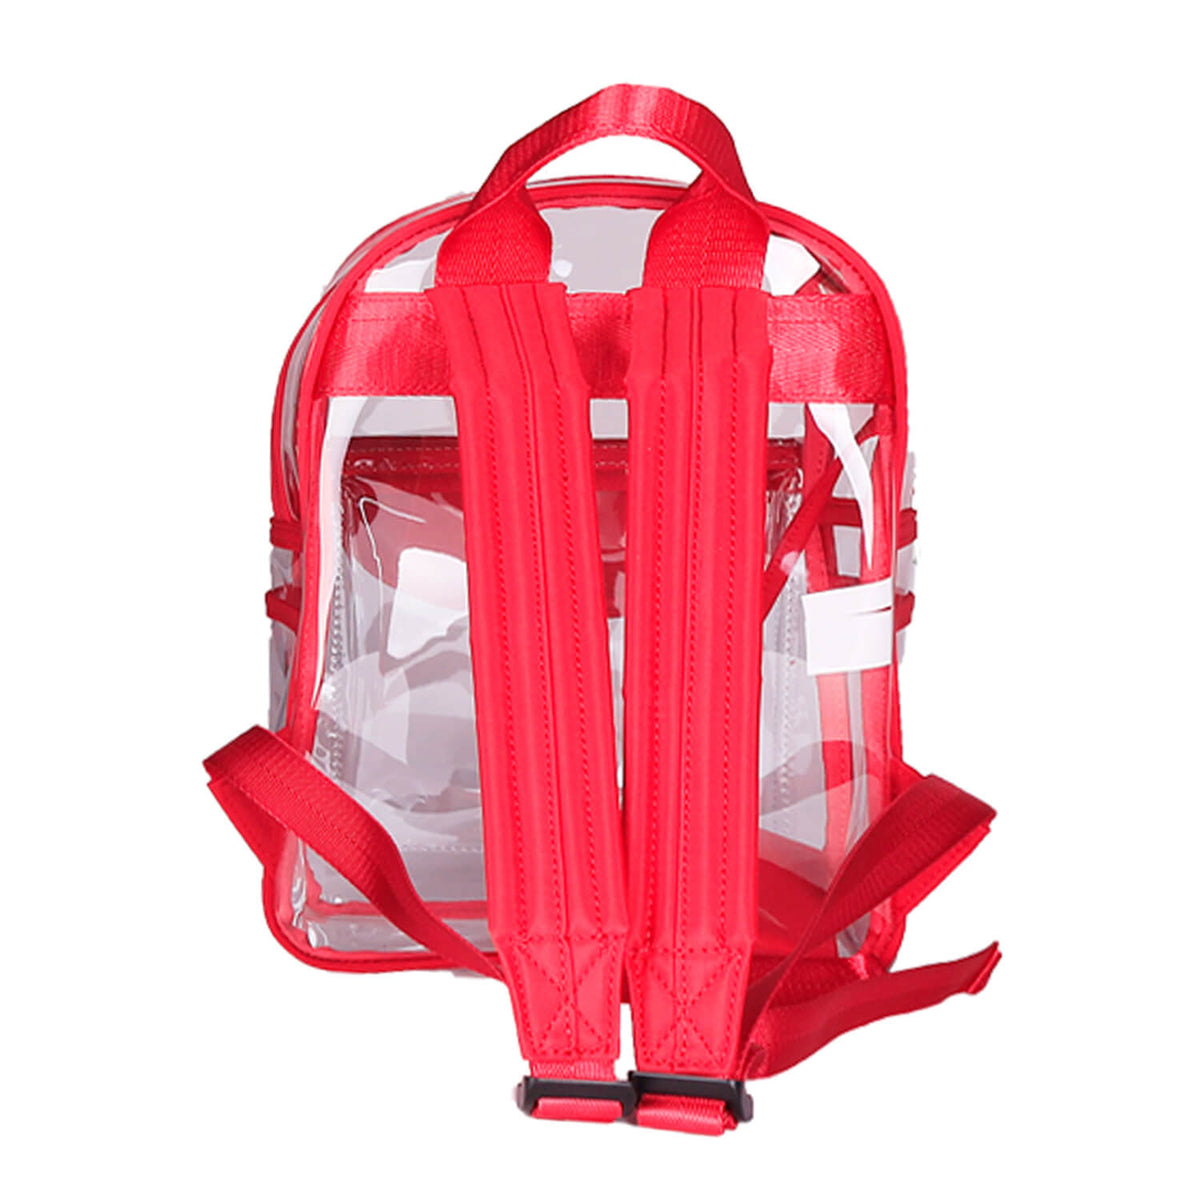 Medium Clear Backpack - LANY